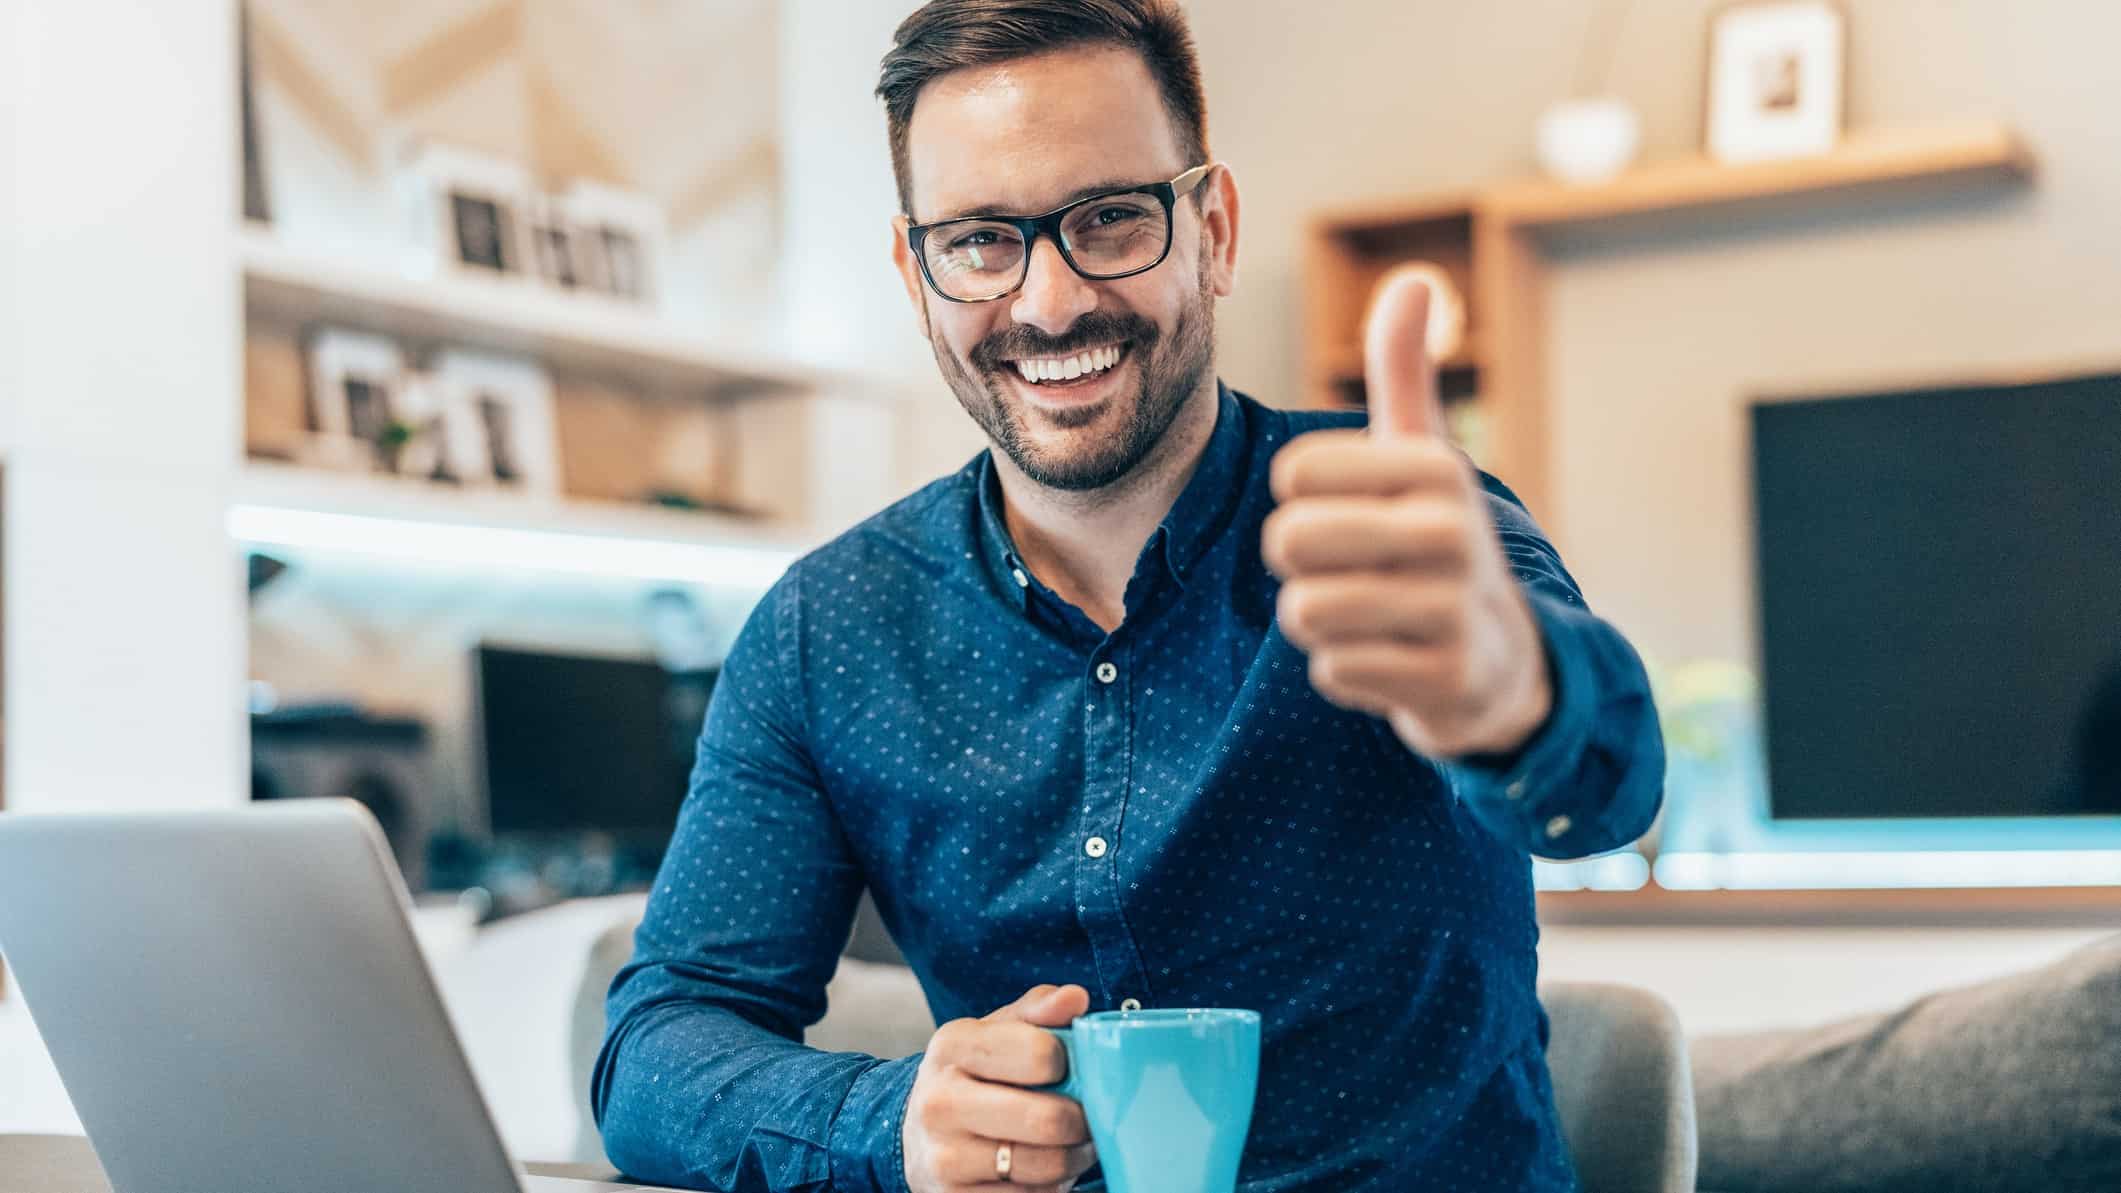 A man holding a cup of coffee puts his thumb up and smiles while at laptop.